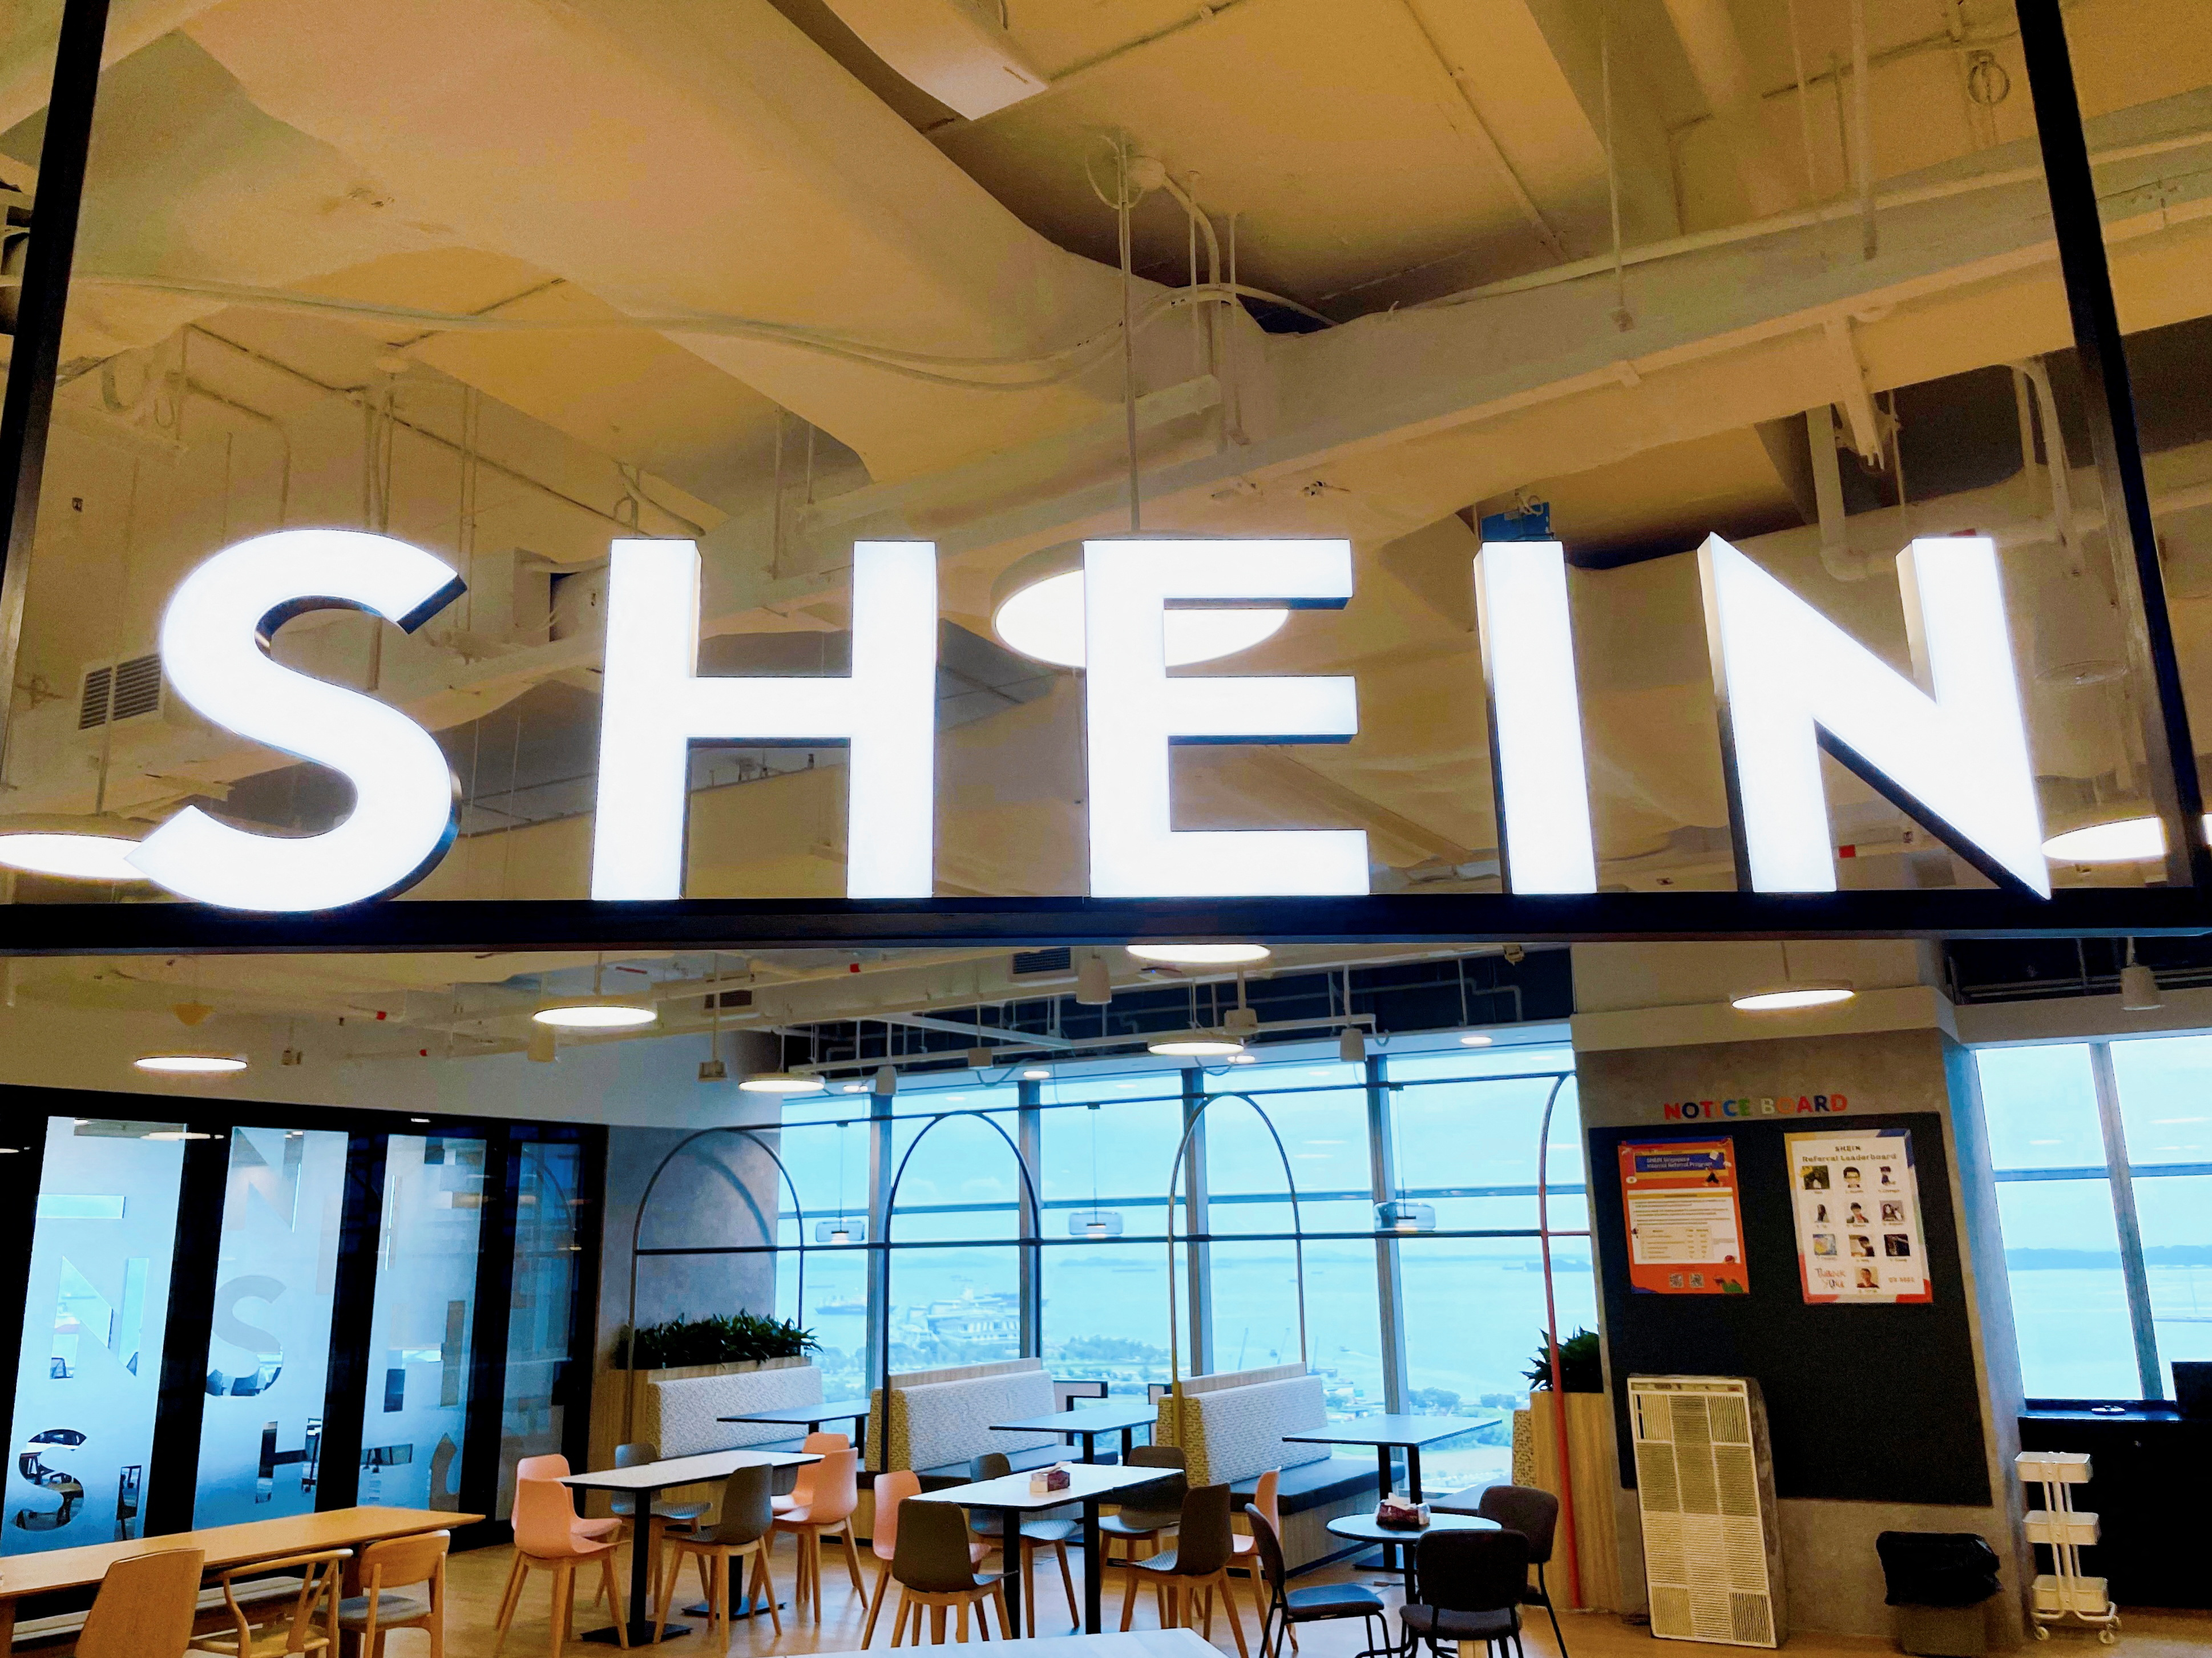 A Shein logo is pictured at the company's office in the central business district of Singapore